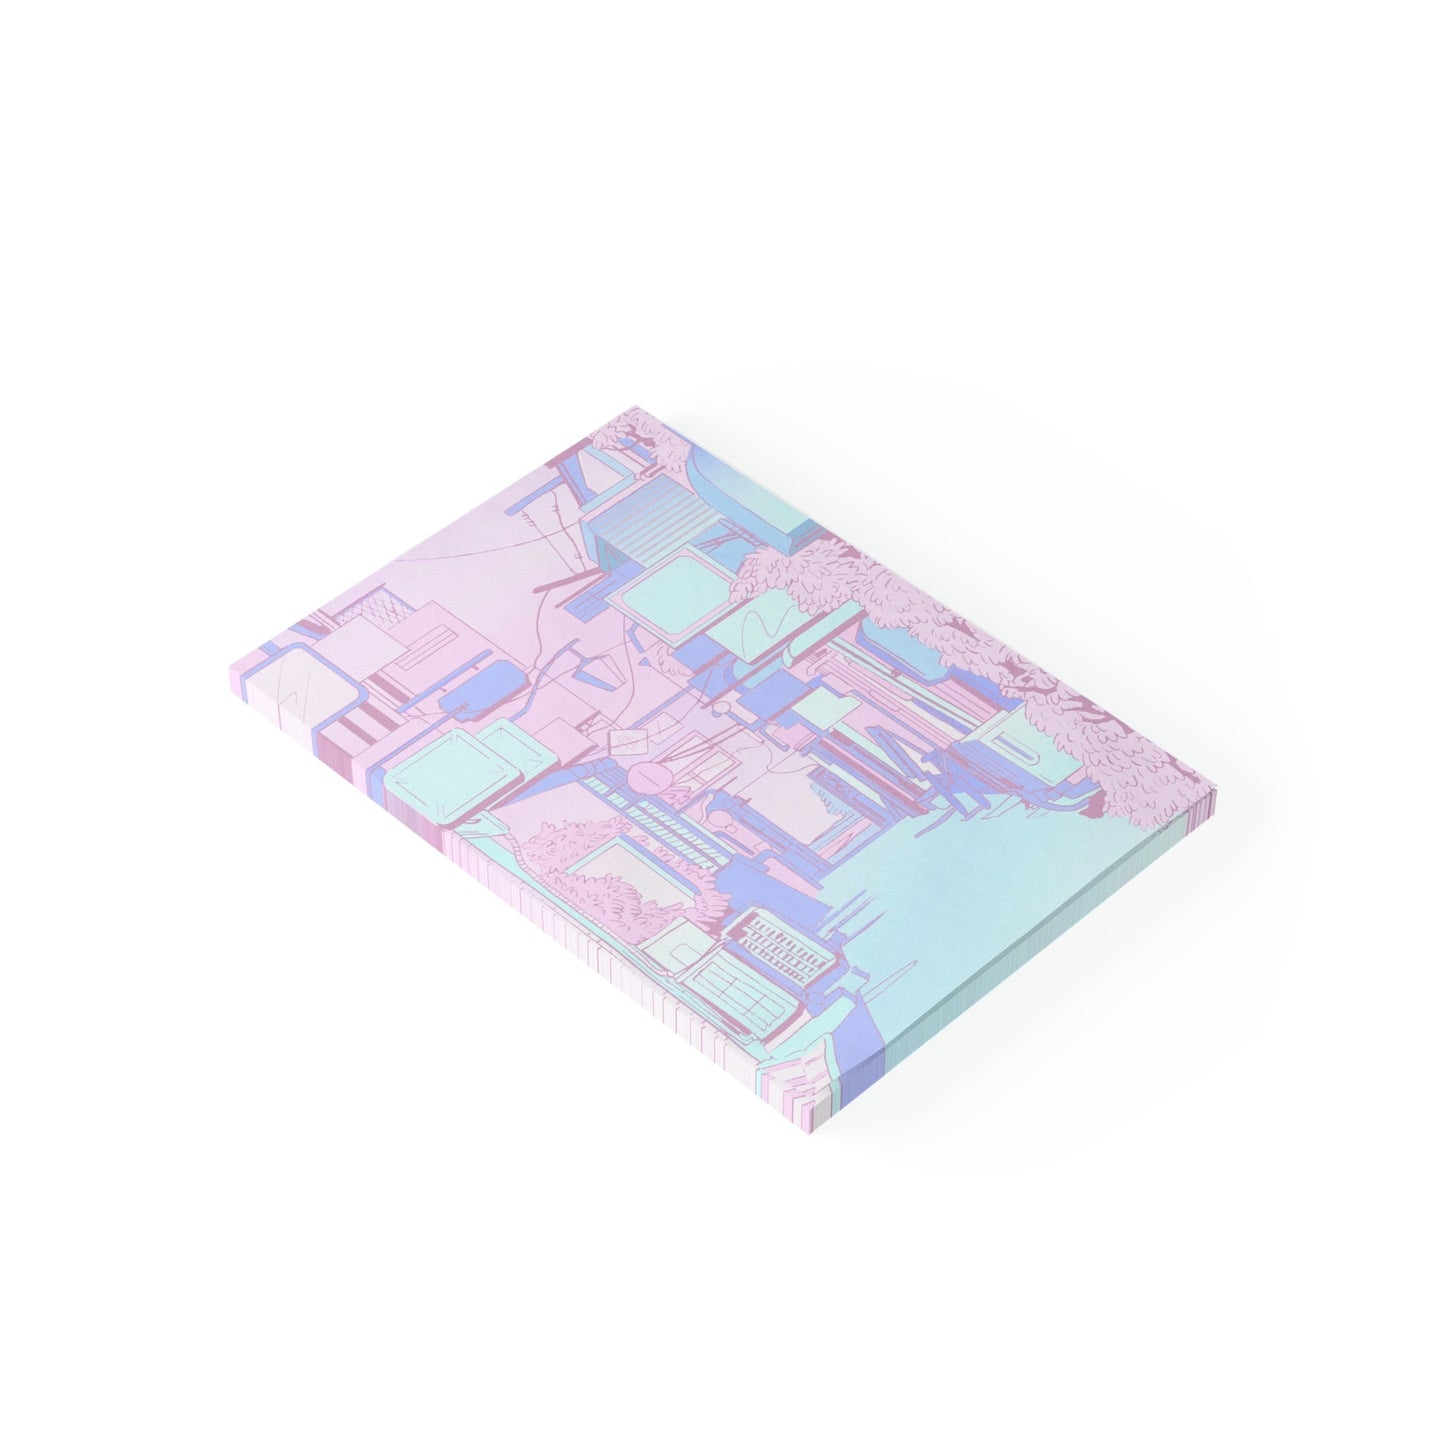 City View Post-it® Note Pad Paper products Pink Sweetheart